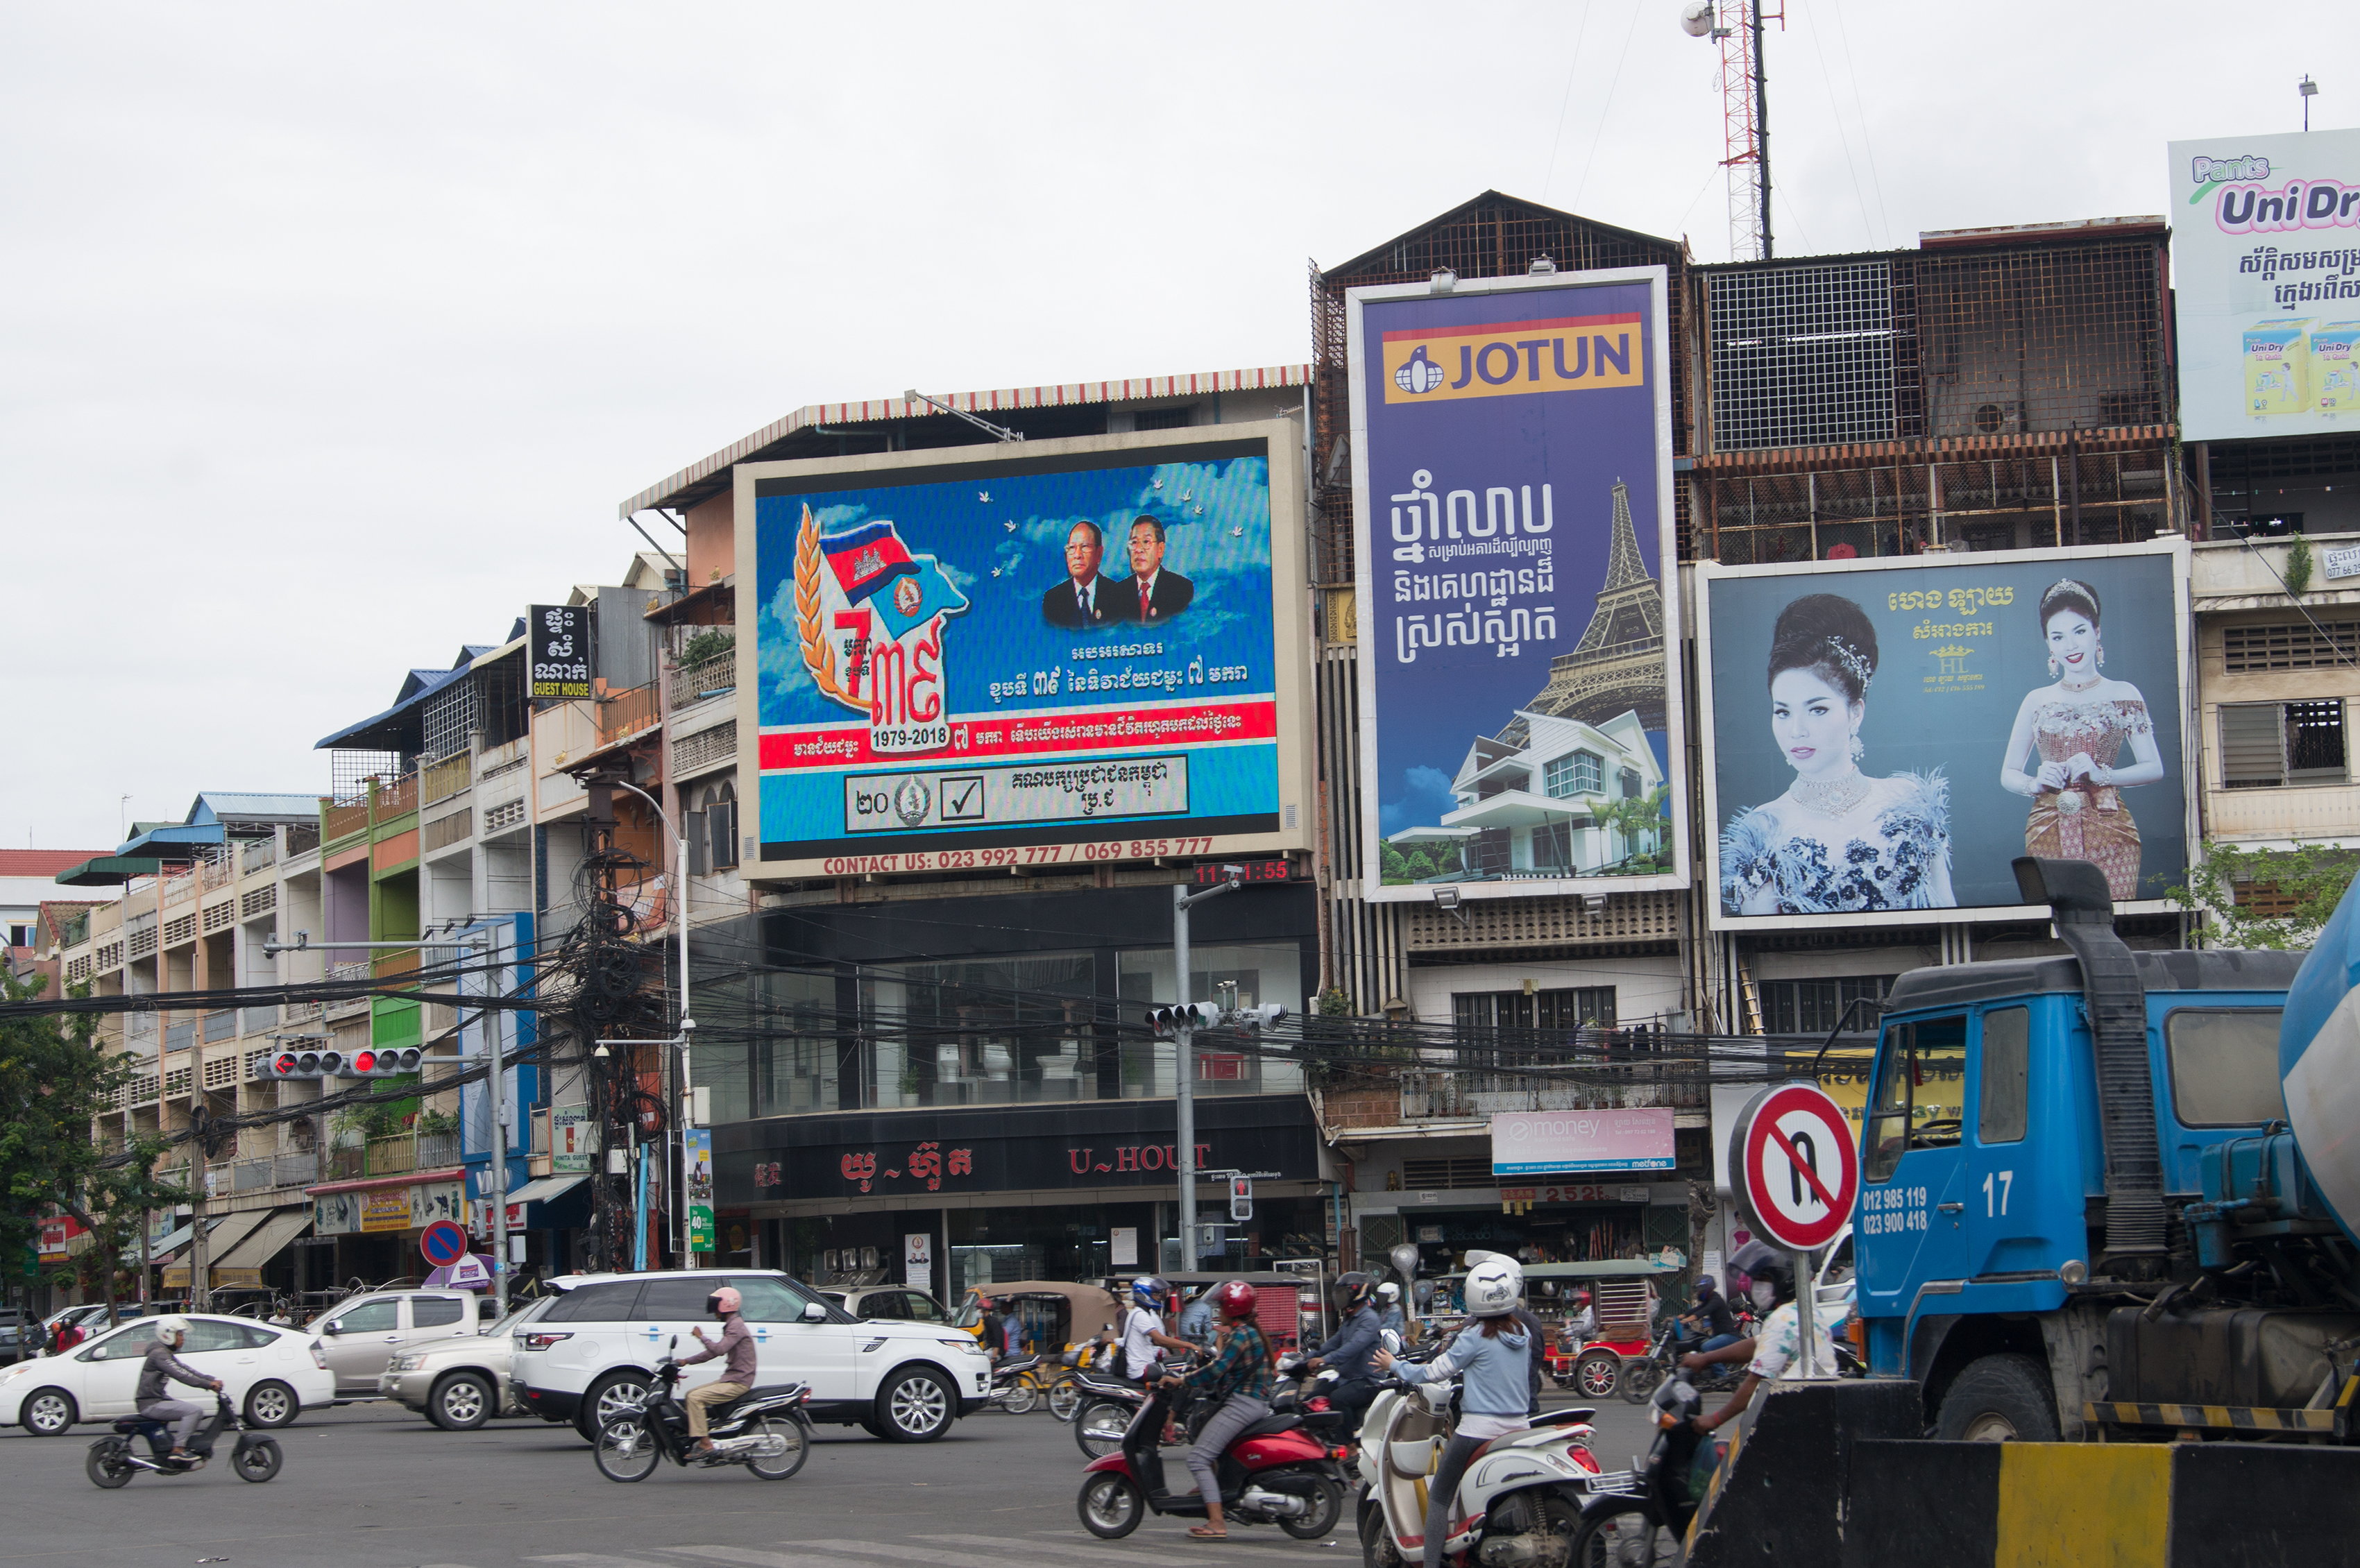 What future for Cambodia after the elections?